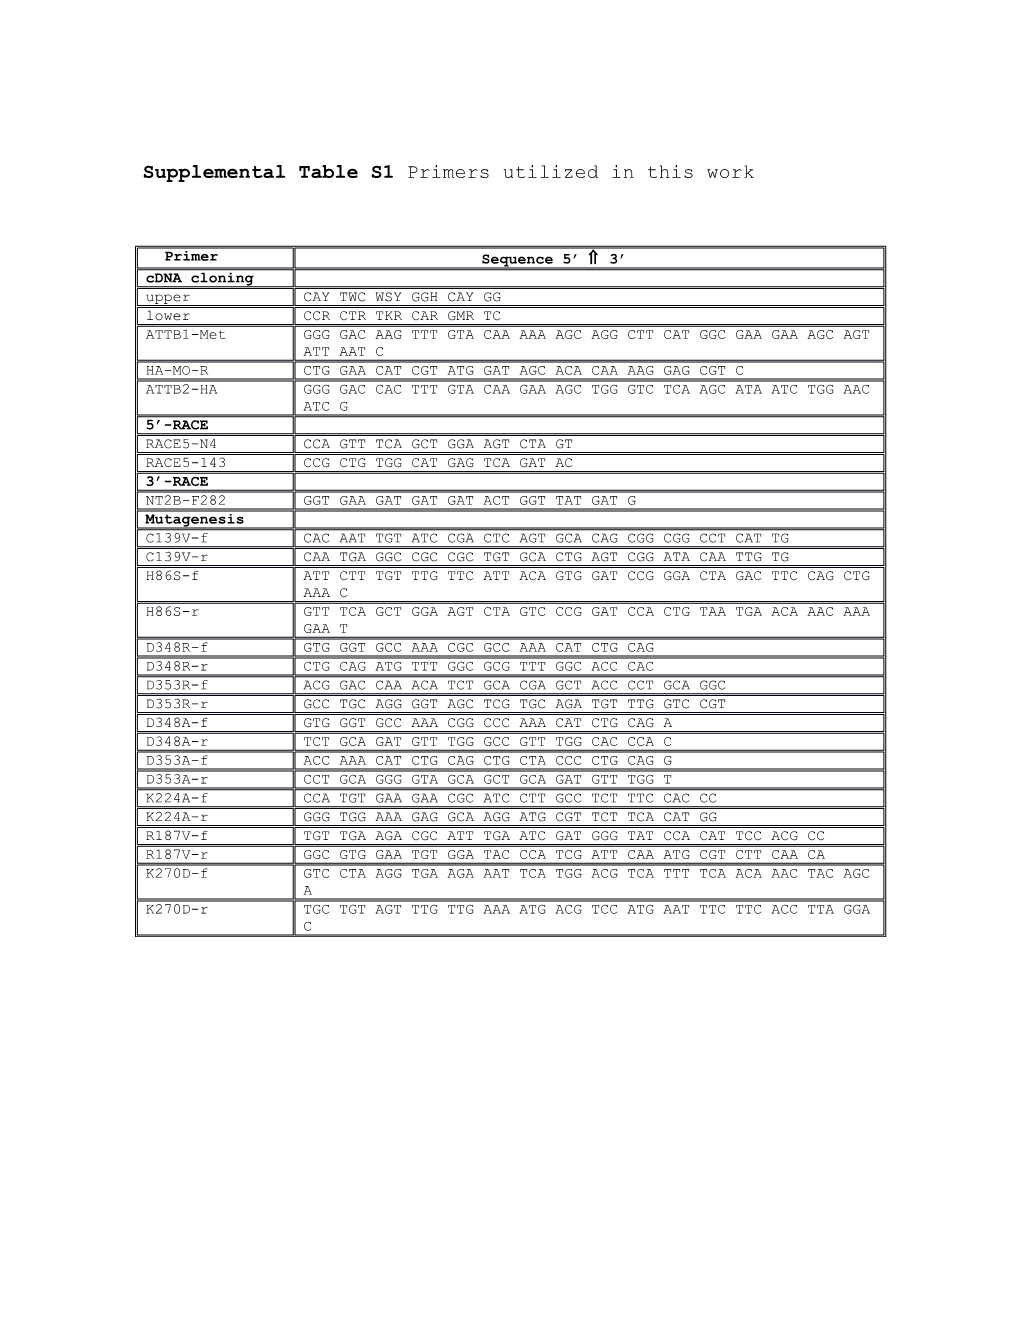 Supplemental Table S1 Primers Utilized in This Work